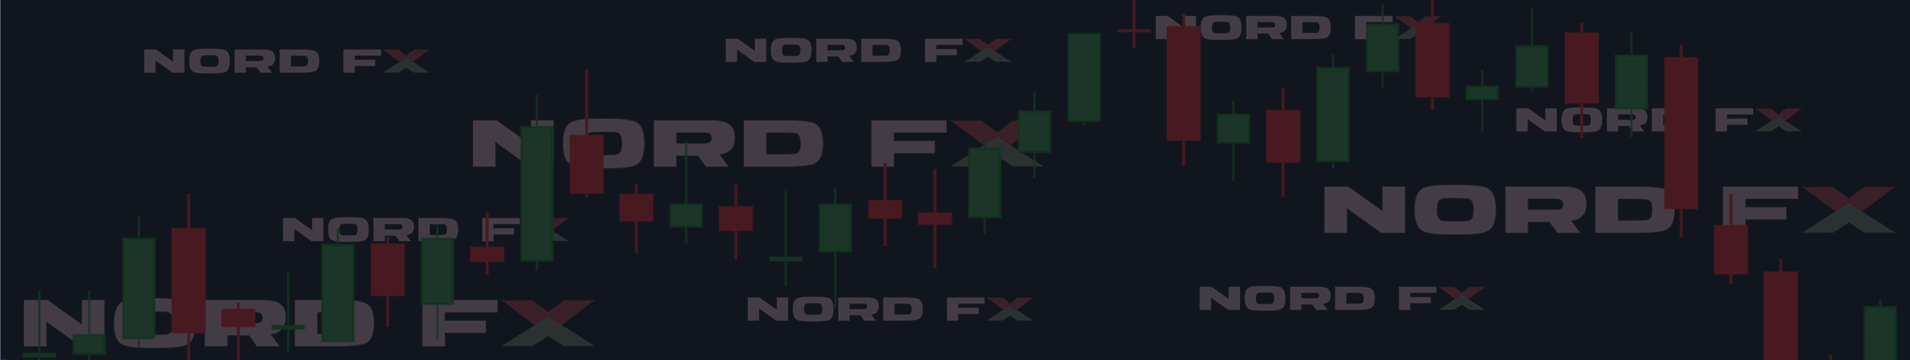 February 2021 Results: NordFX Traders Name Gold and Bitcoin as Leaders Again